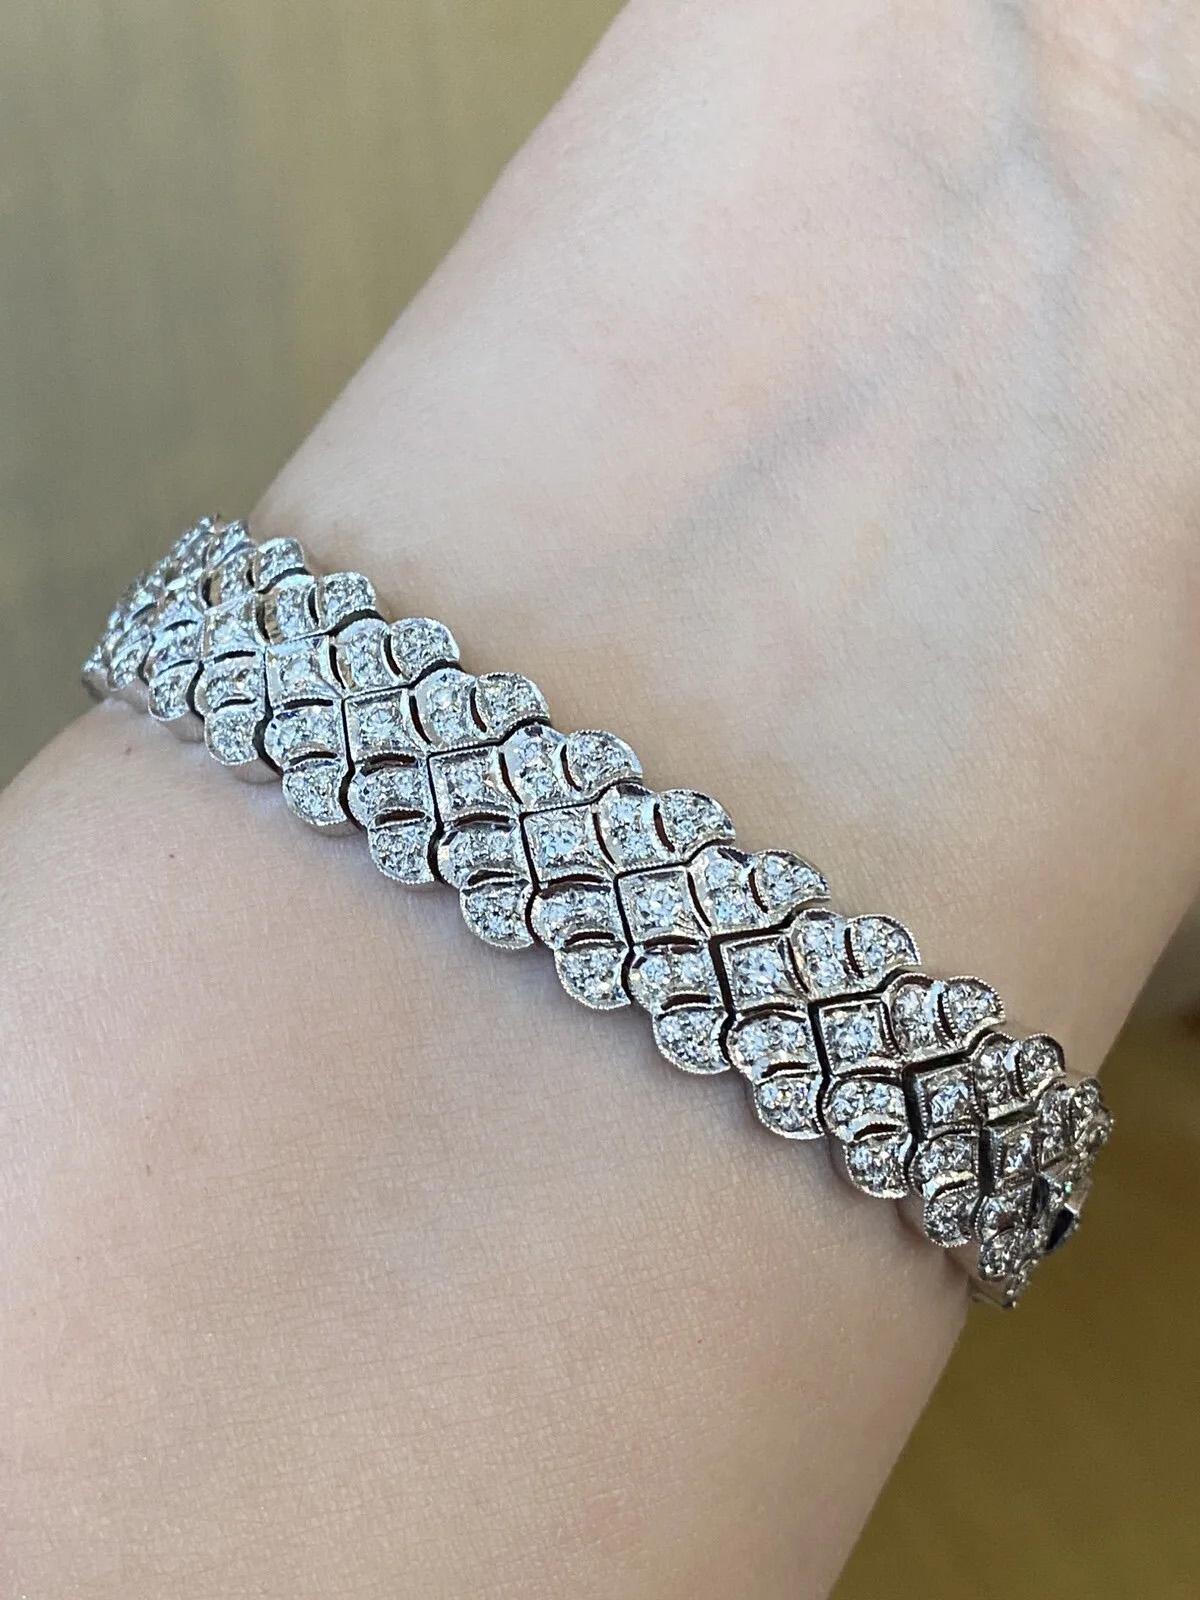 Vintage Scalloped Link Diamond Bracelet 4.50 carat total weight in 18k White Gold.

Diamond Bracelet features Scalloped Links set with Round Brilliant cut Diamonds in 18k White Gold. Bracelet is secured by a push button tongue clasp with 2 safety